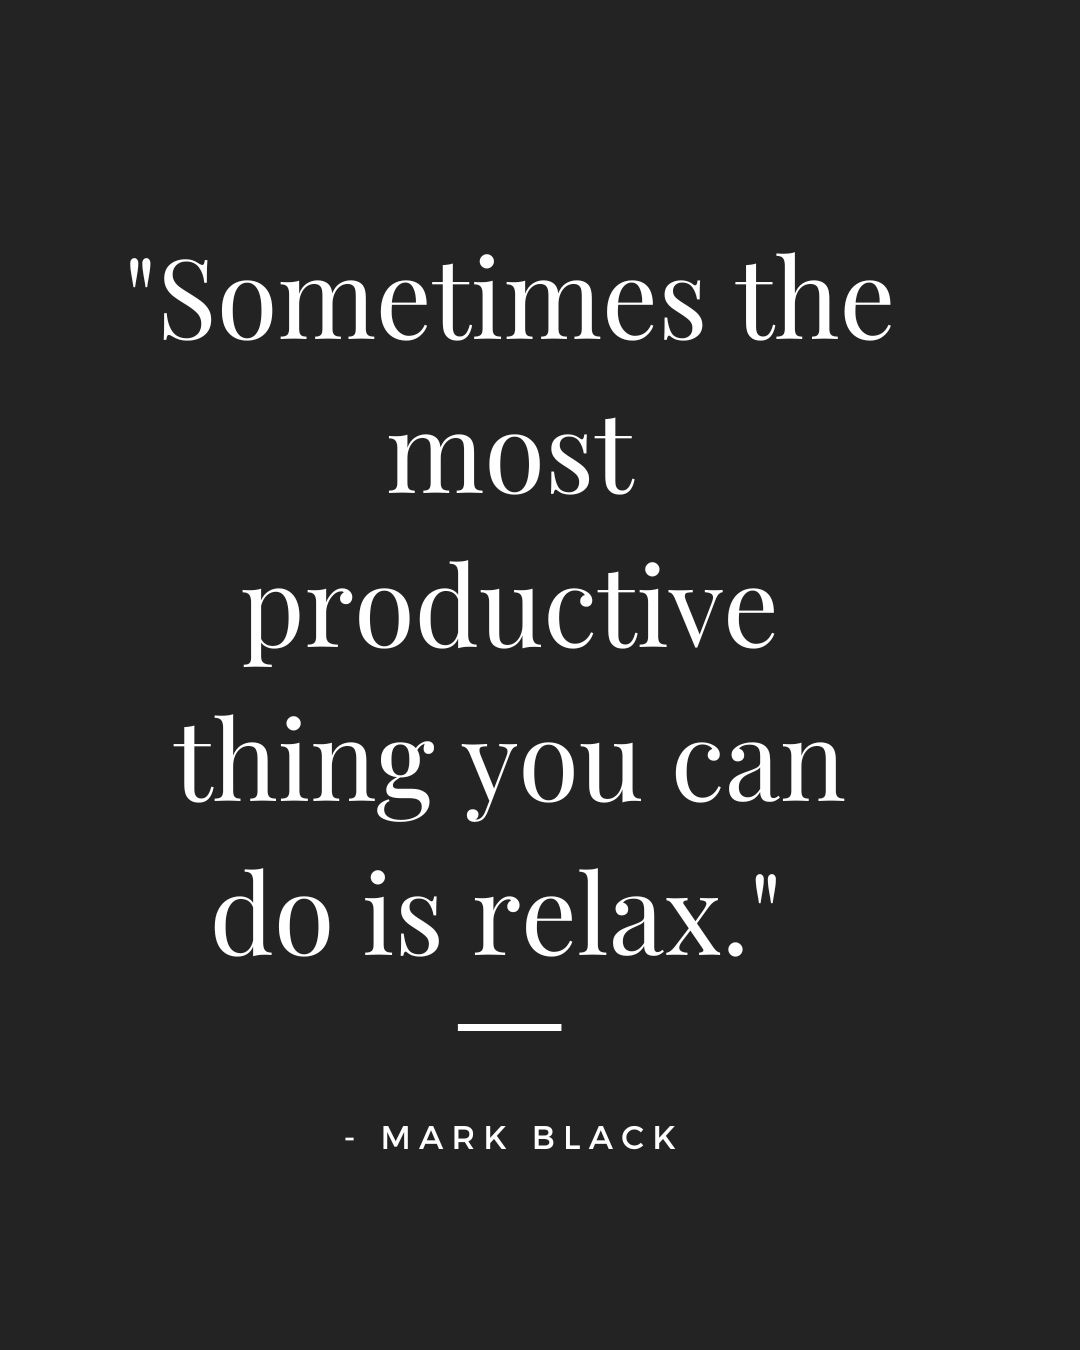 30 Quotes to Help You Relax and Unwind